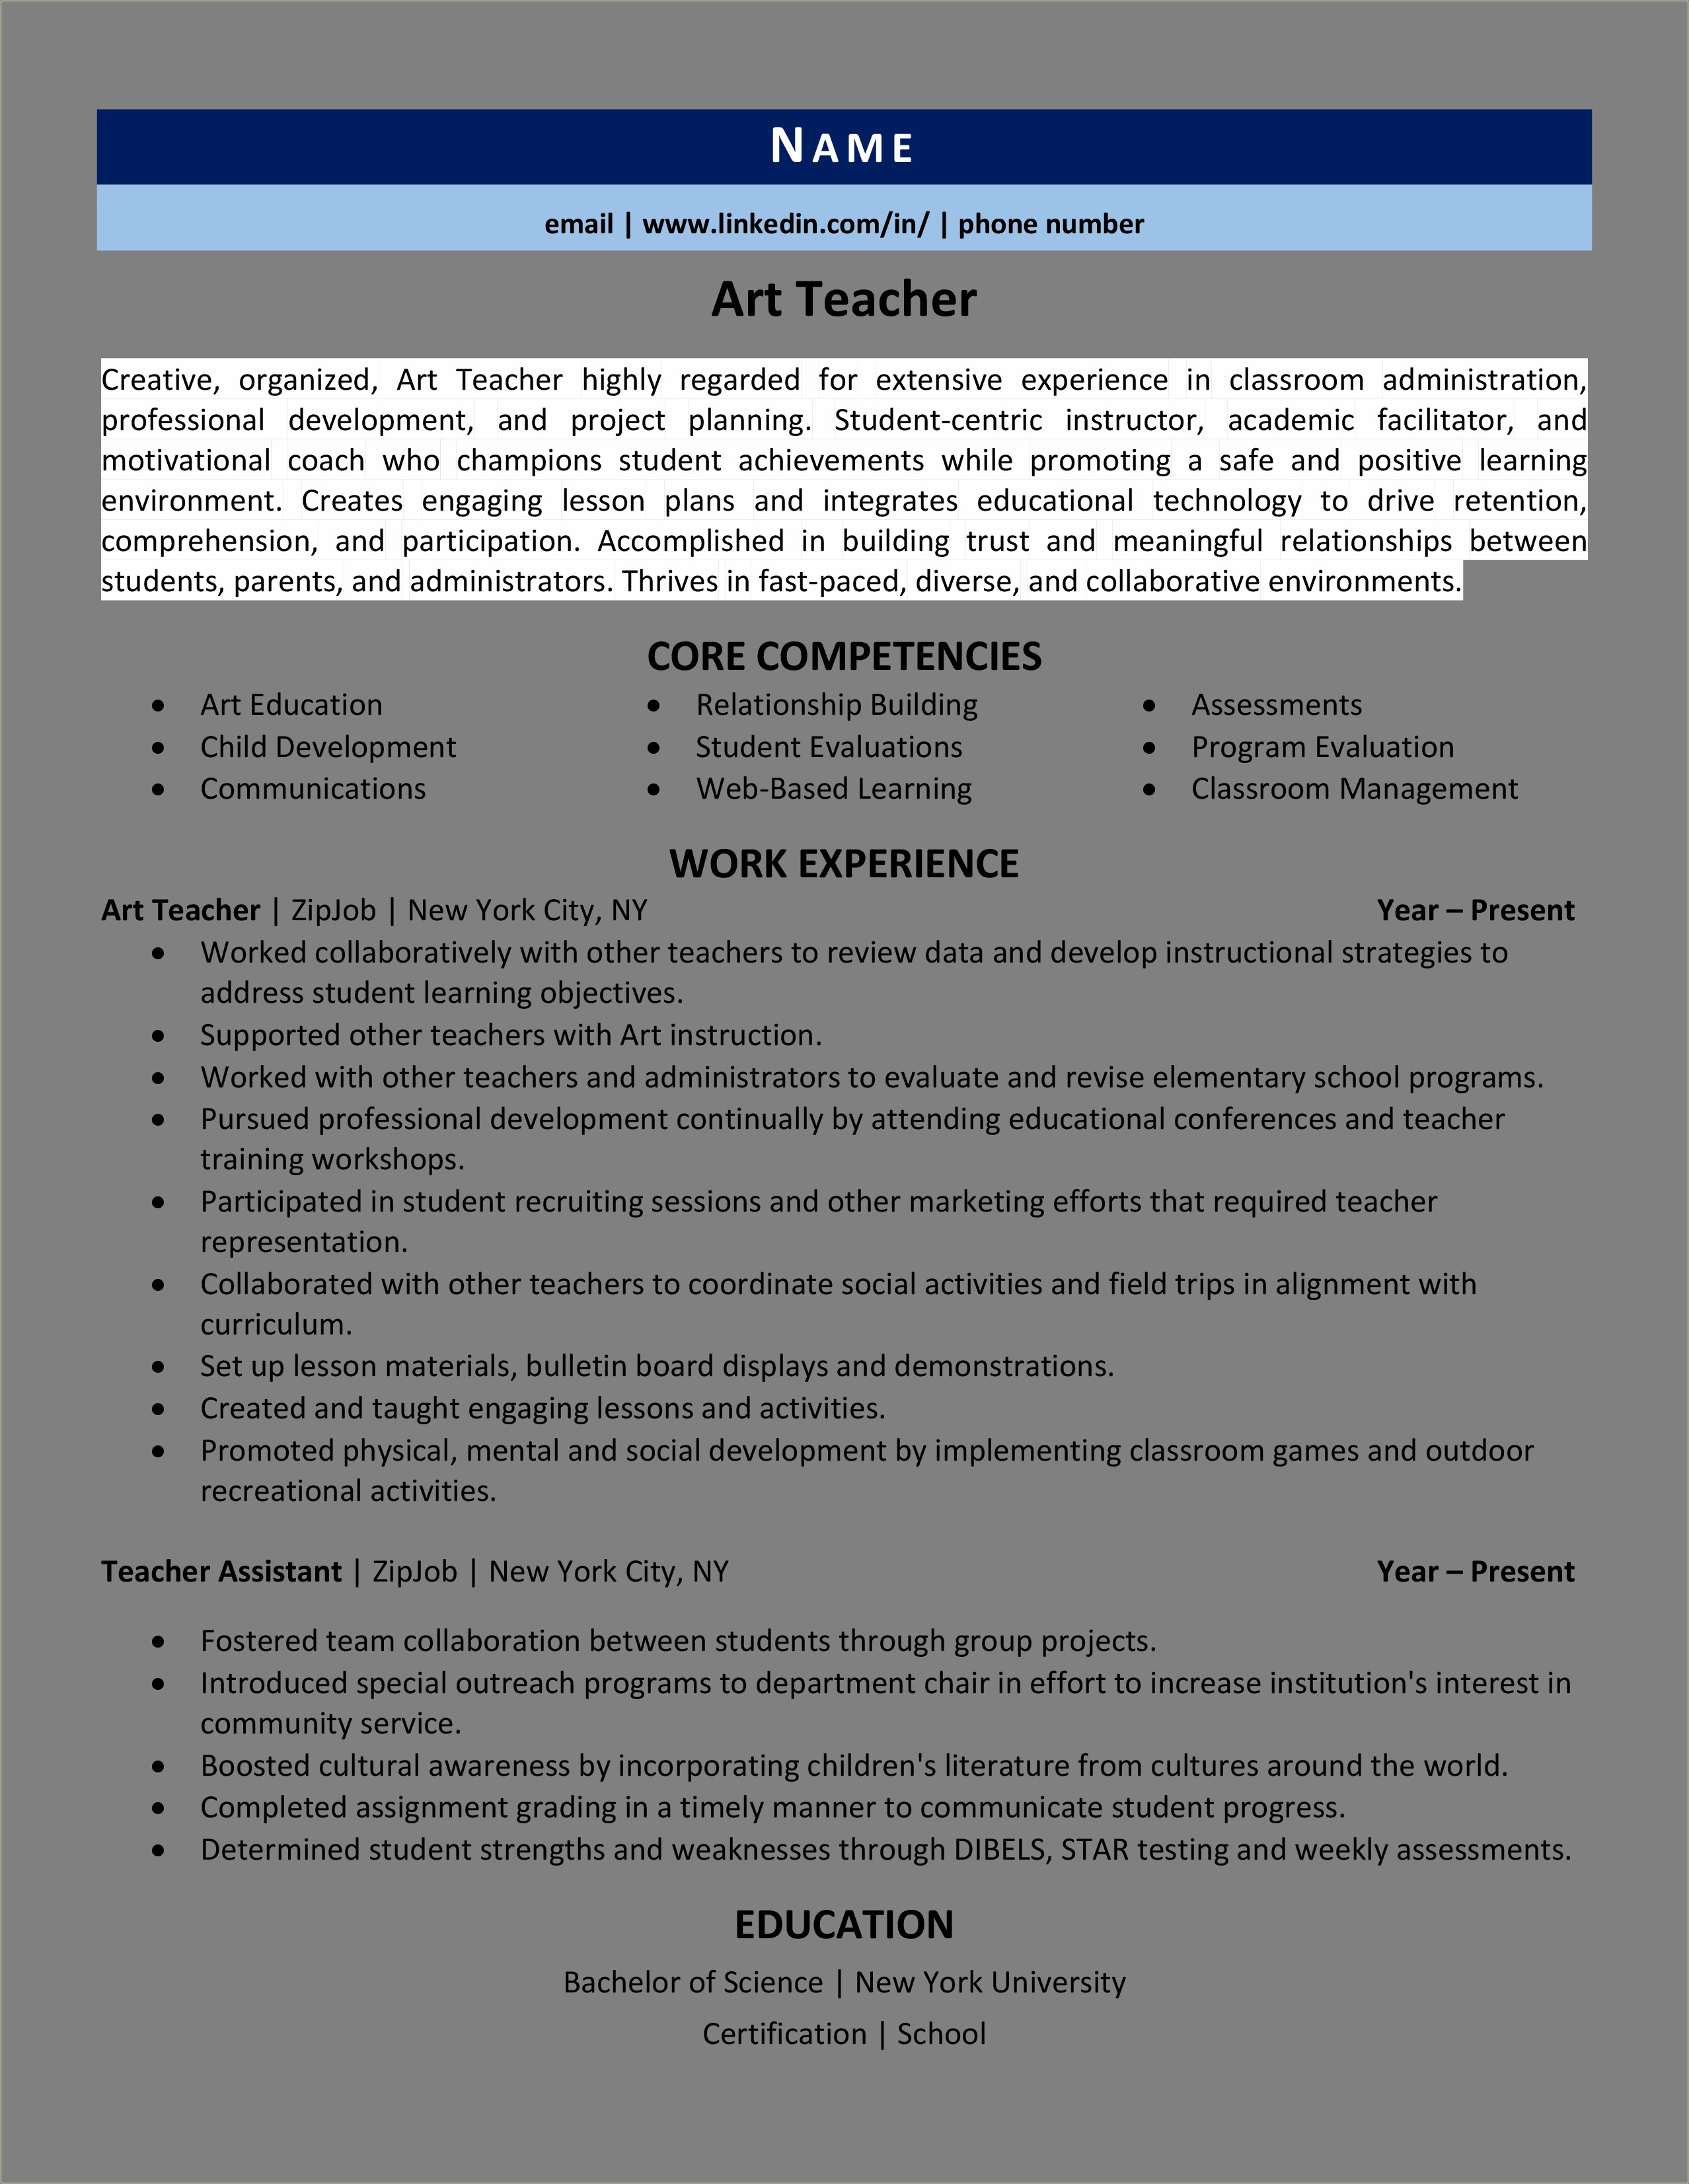 Art Teaching Resume With Team Leader Experience